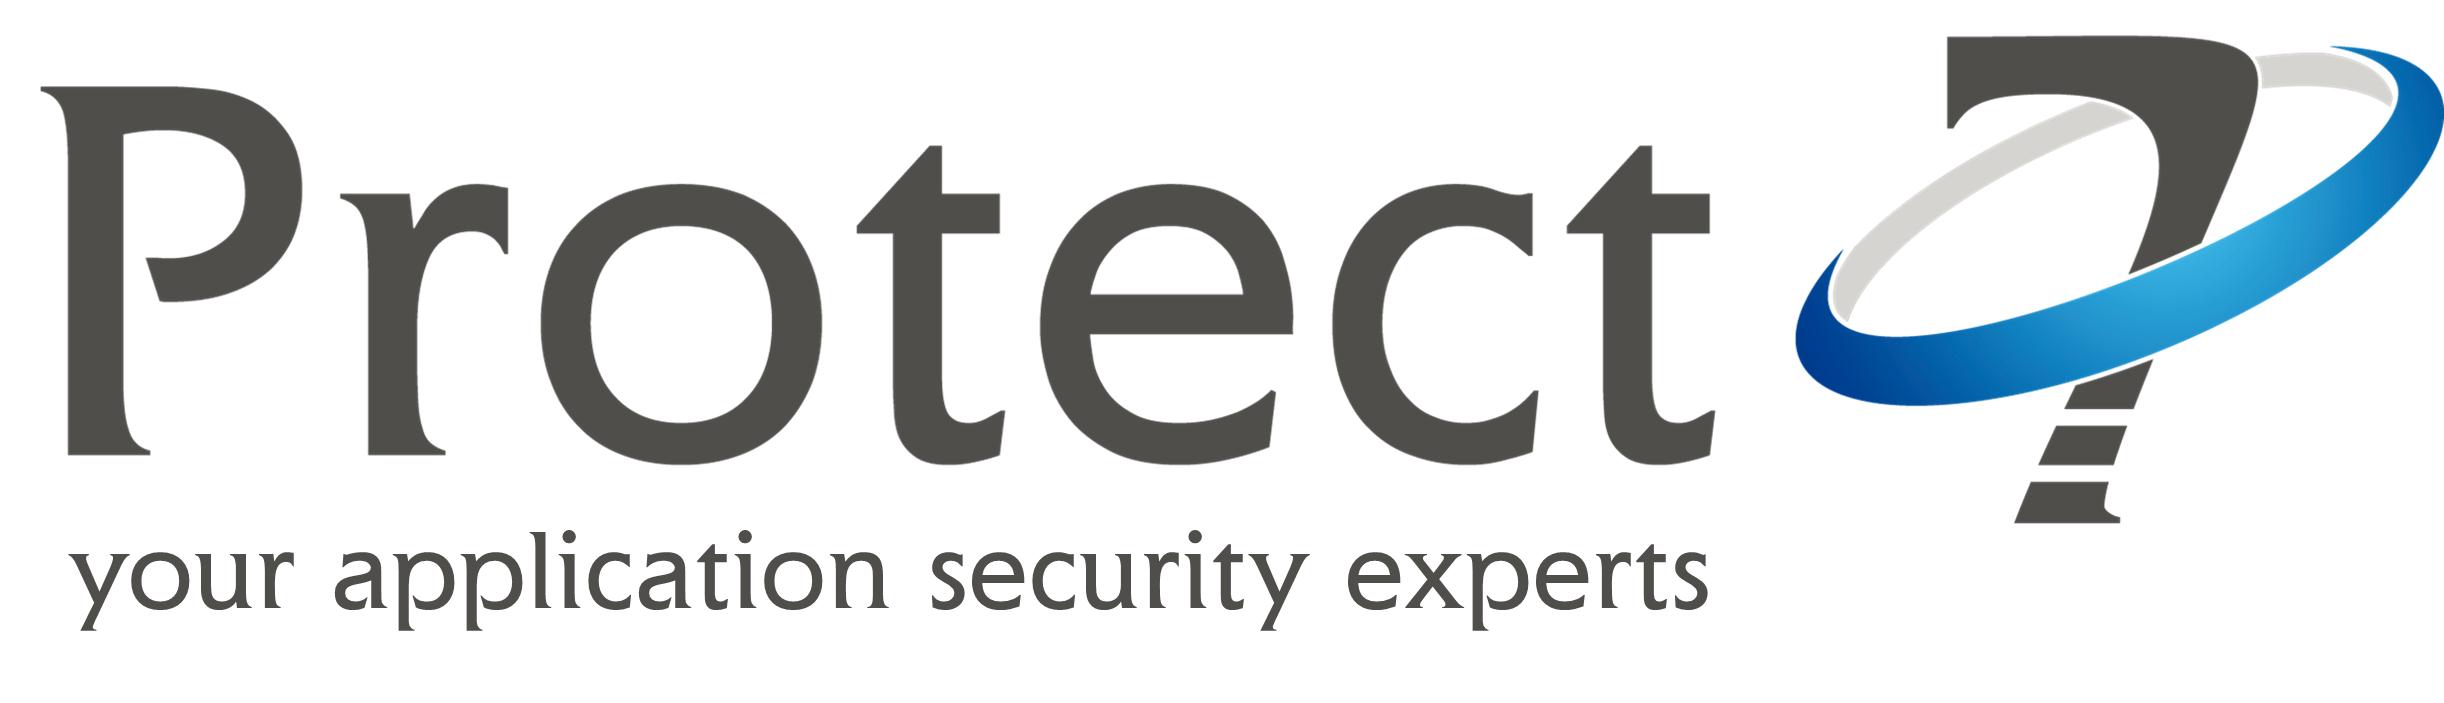 Logo Protect7 - Your application security experts